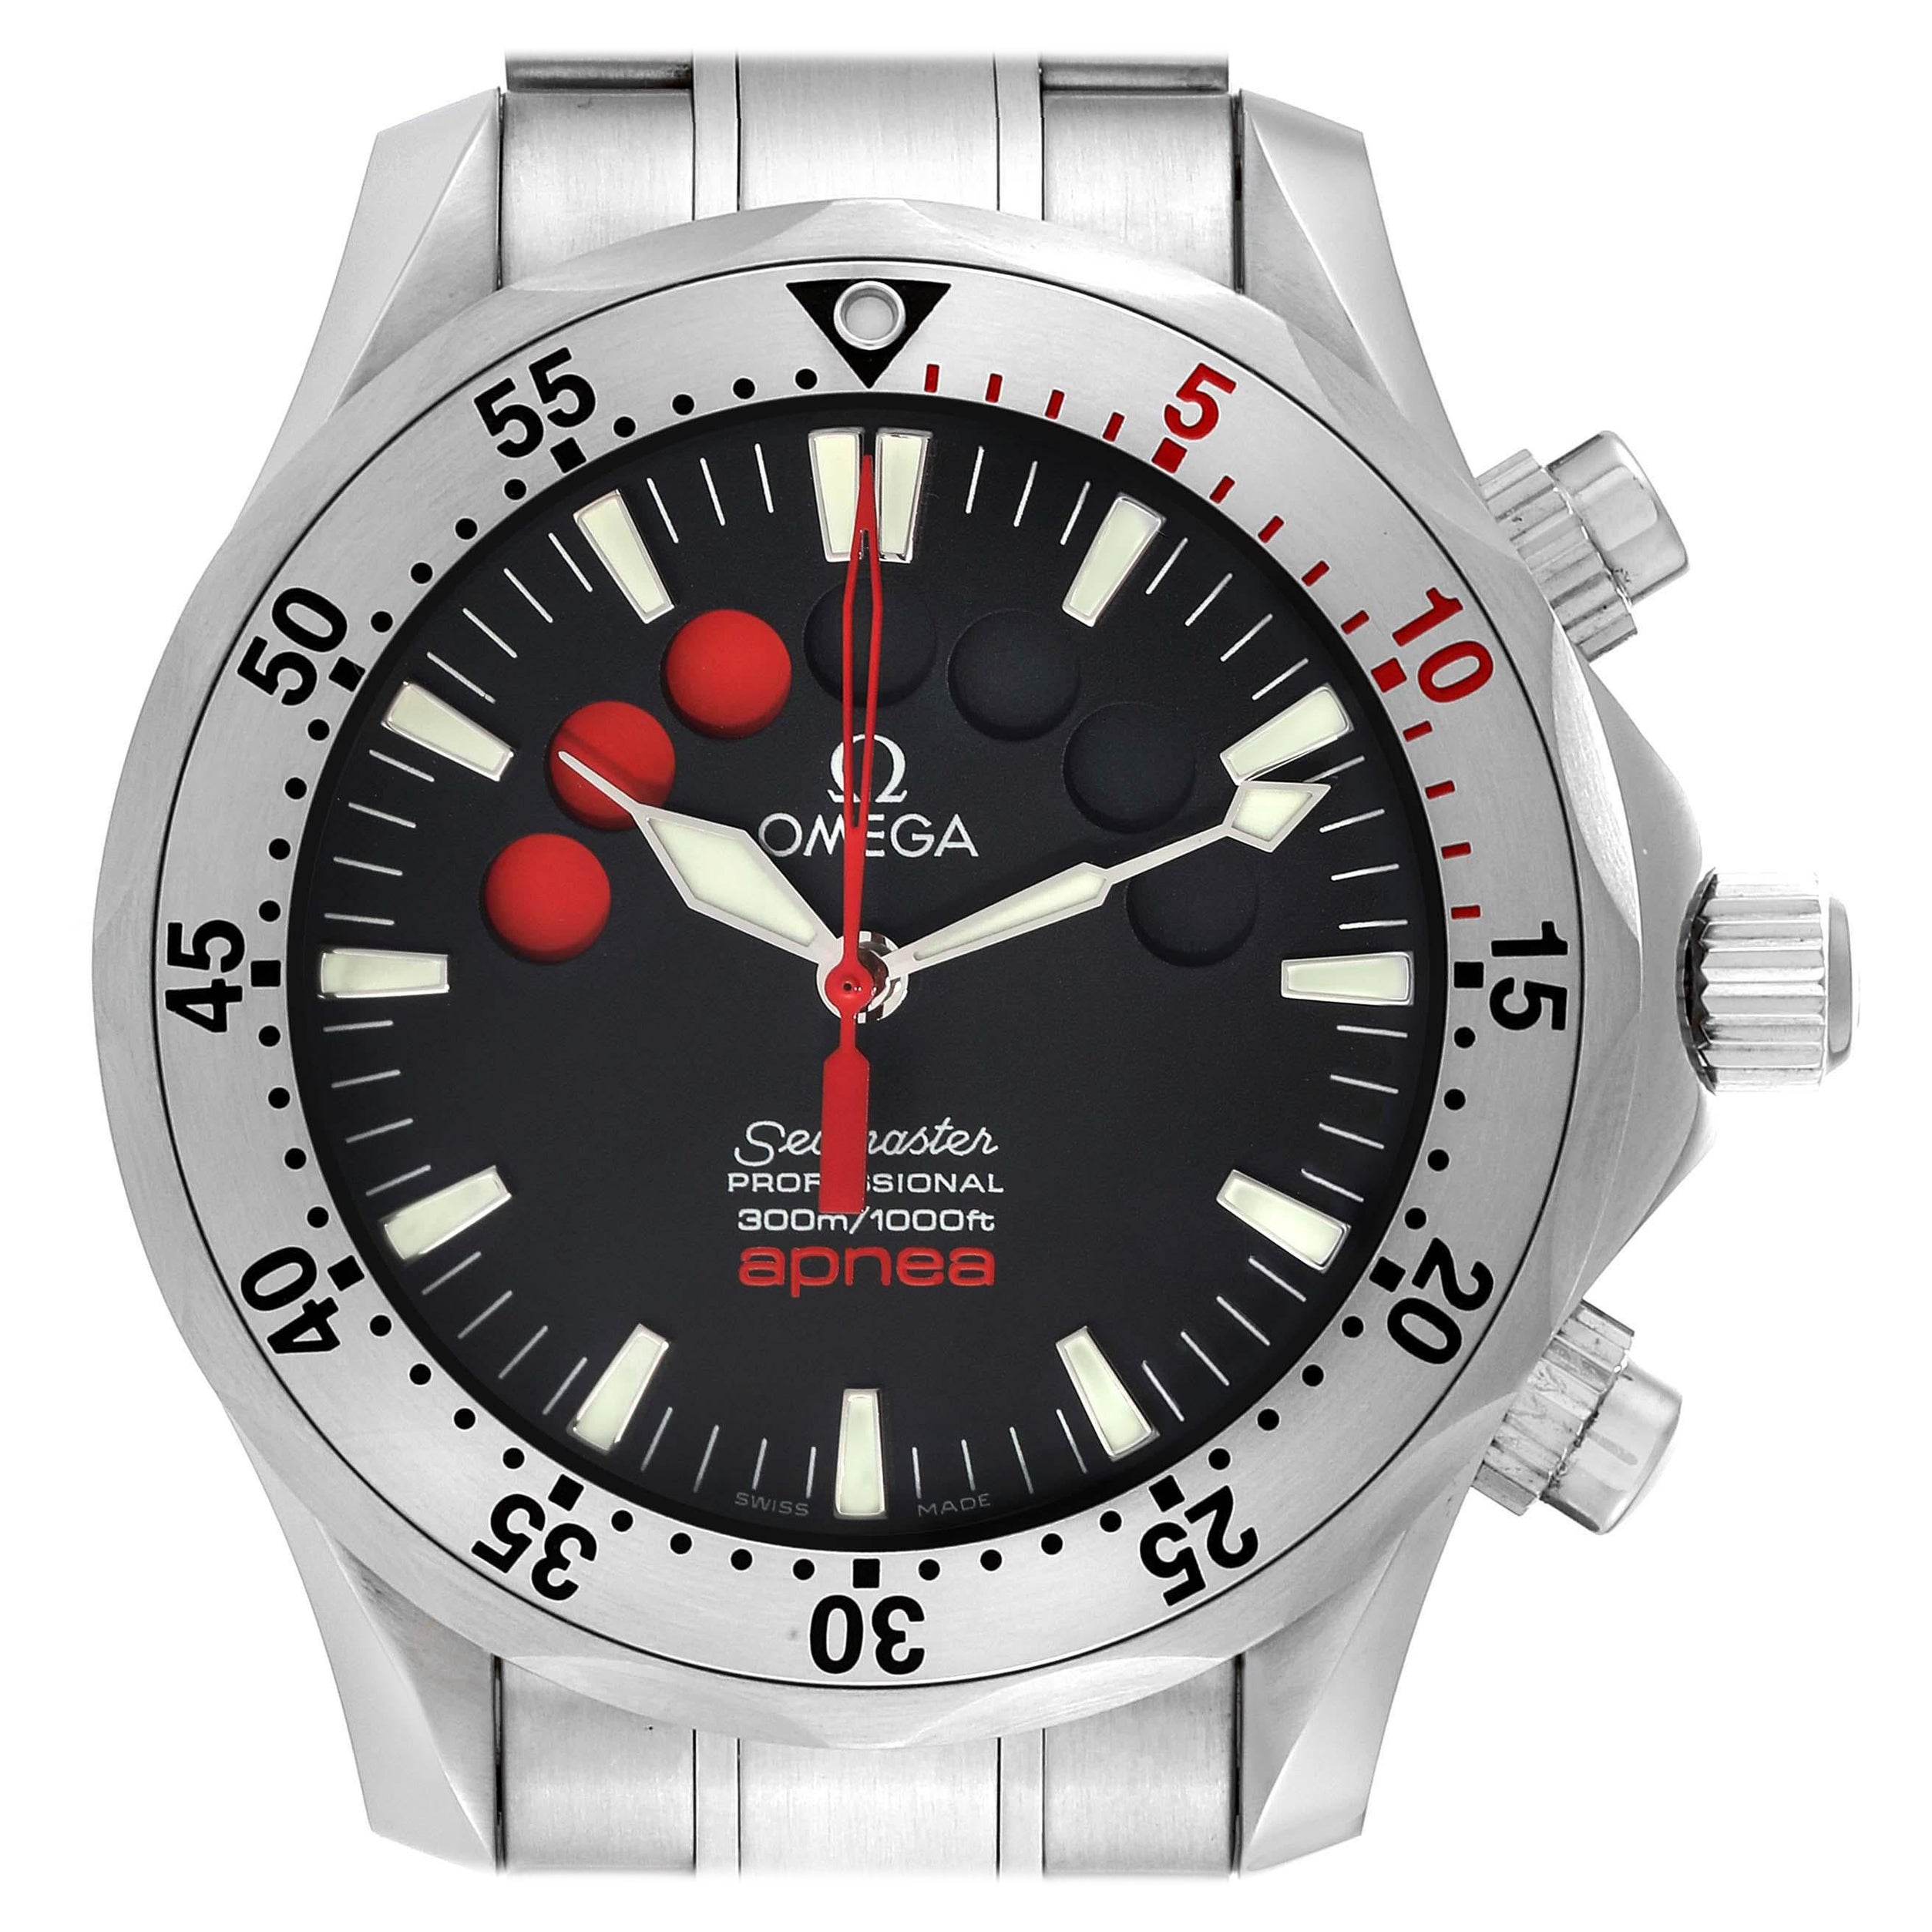 Omega Seamaster Apnea Jacques Mayol Steel Mens Watch 2595.50.00 Box Card For Sale